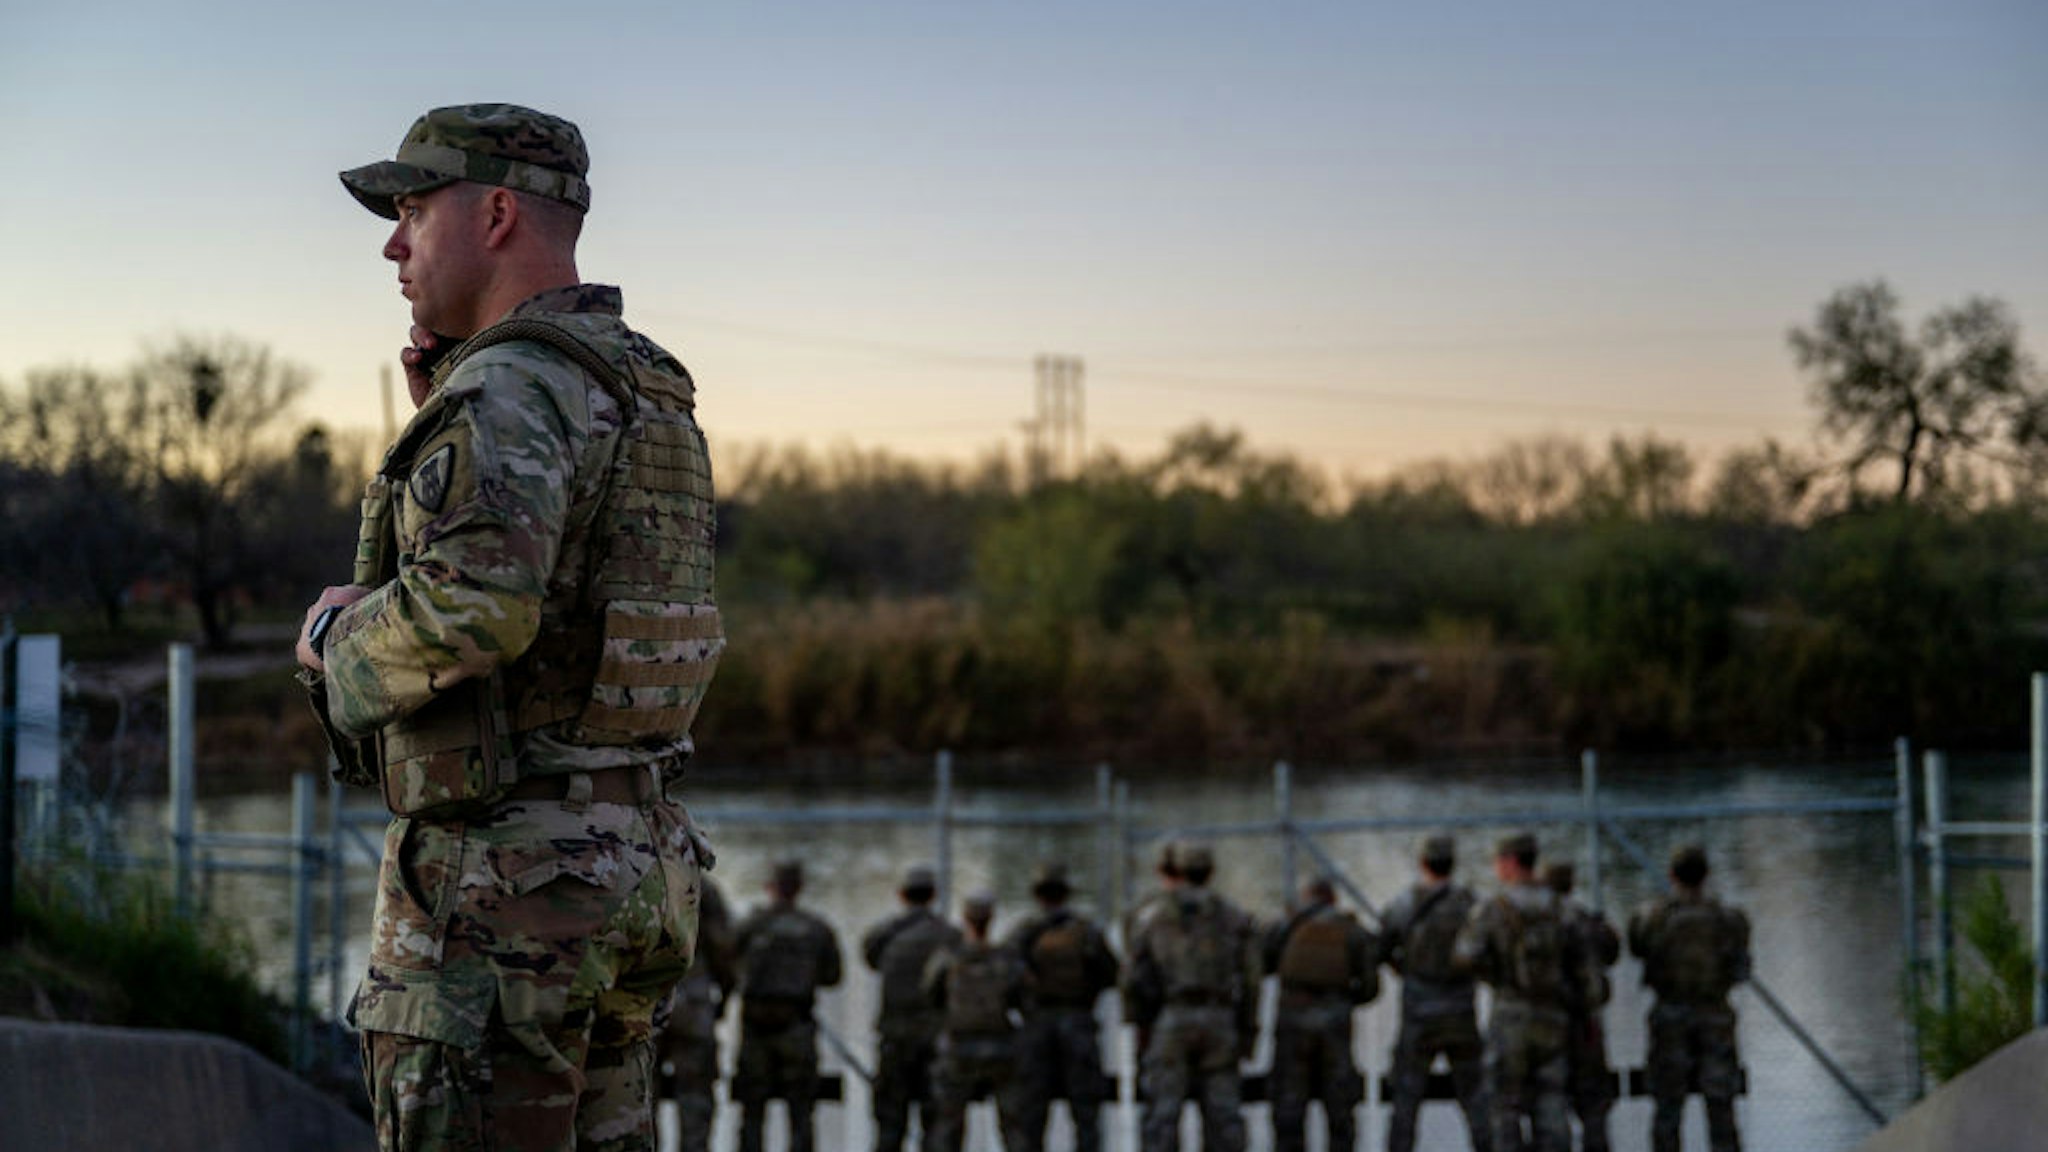 EAGLE PASS, TEXAS - JANUARY 12: National Guard soldiers stand guard on the banks of the Rio Grande river at Shelby Park on January 12, 2024 in Eagle Pass, Texas. The Texas National Guard continues its blockade and surveillance of Shelby Park in an effort to deter illegal immigration. The Department of Justice has accused the Texas National Guard of blocking Border Patrol agents from carrying out their duties along the river.